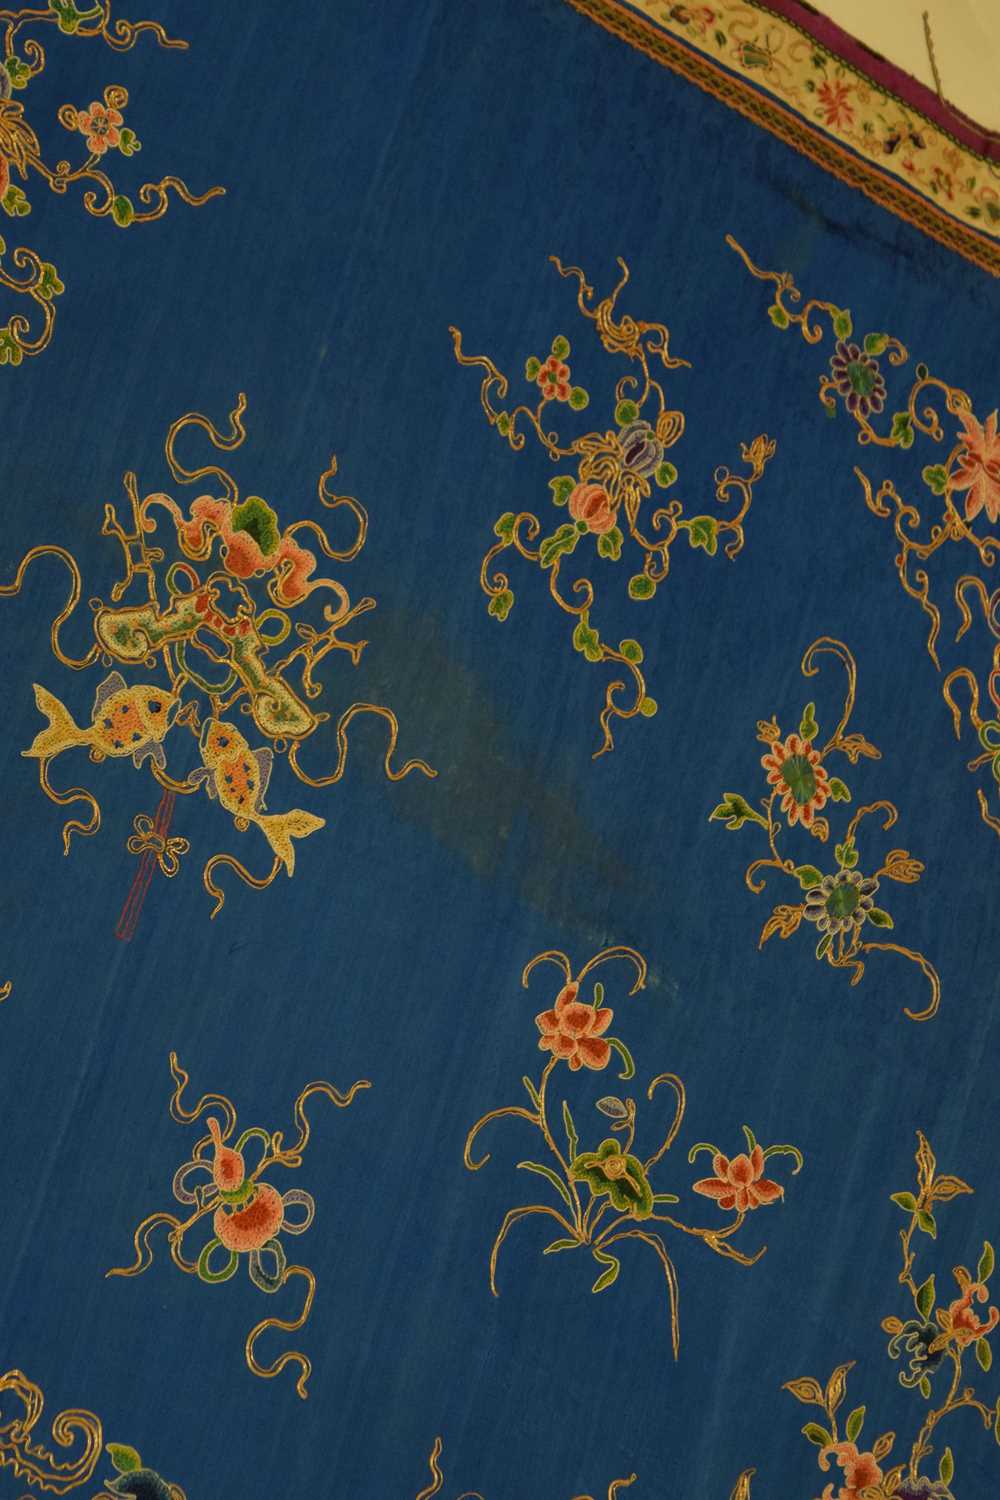 19th century Chinese silk wall hanging - Image 7 of 9